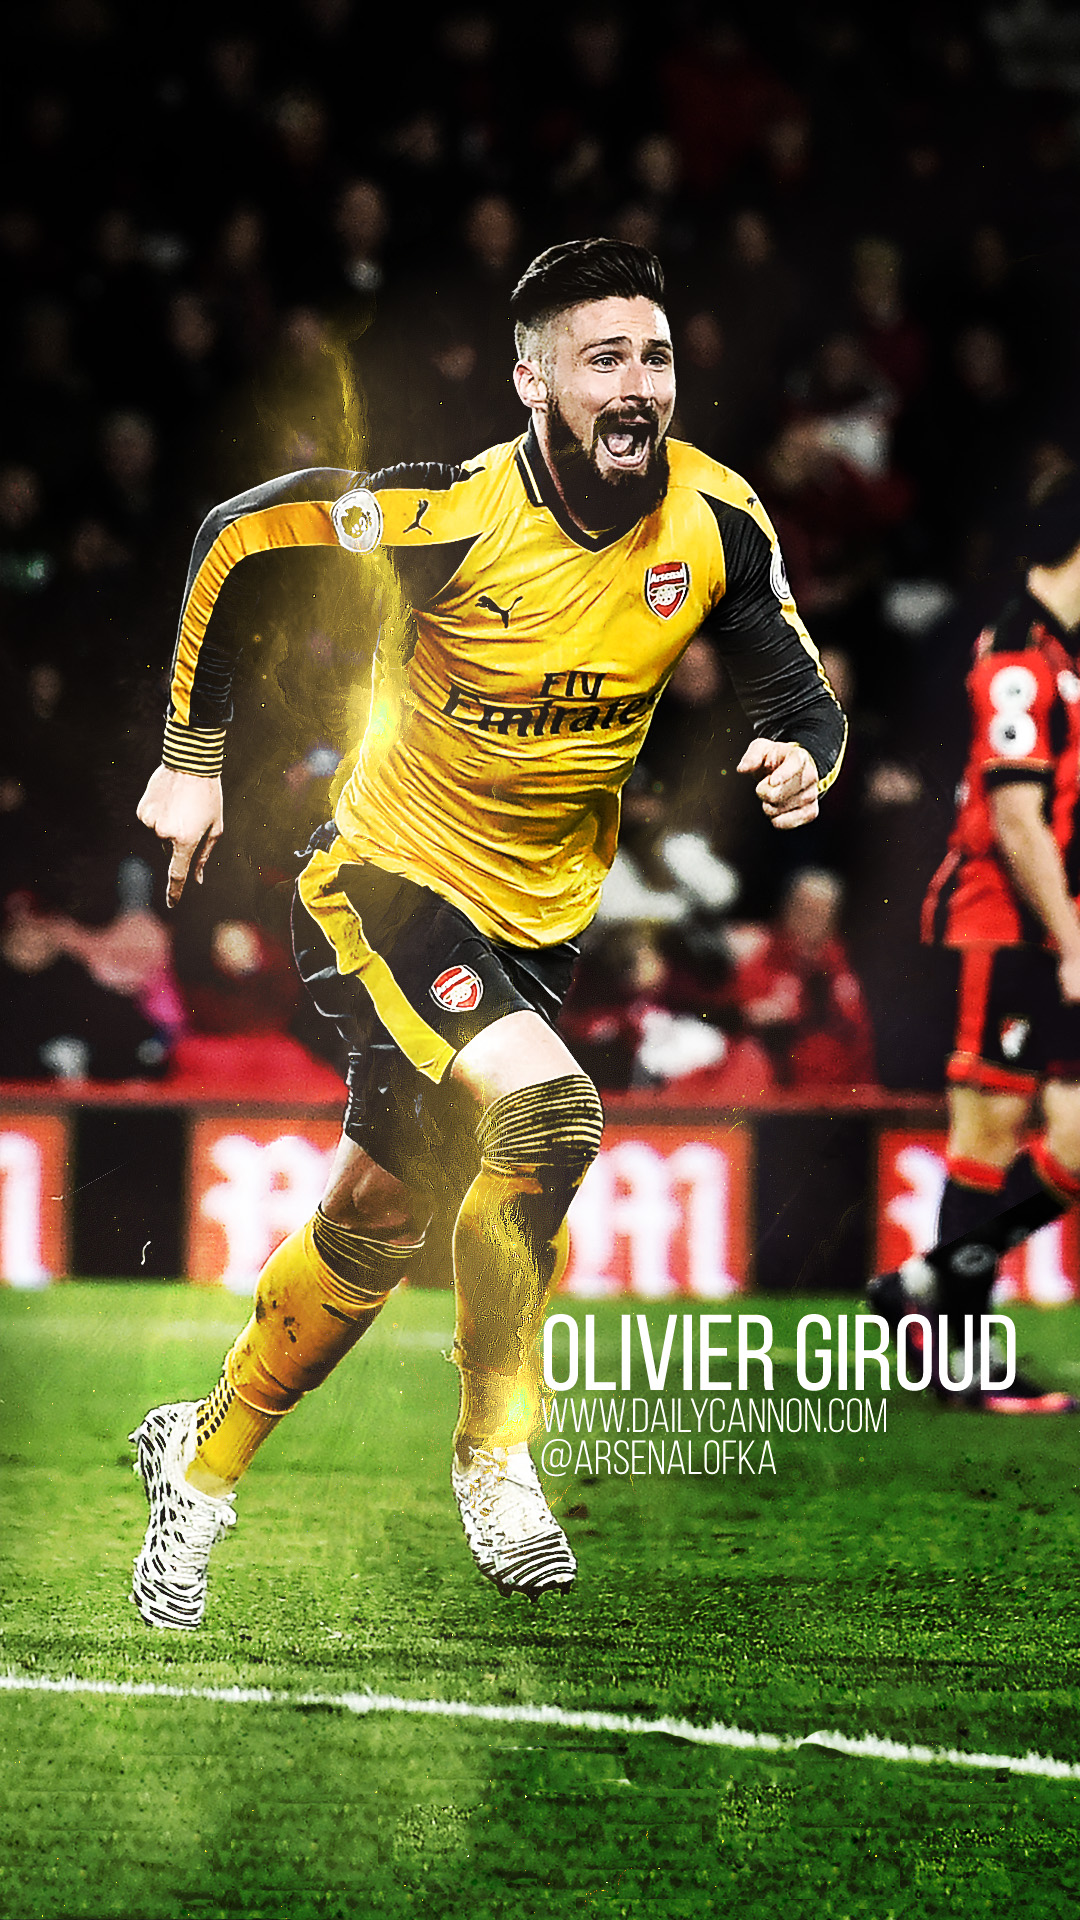 6 Arsenal-themed wallpapers for your phone